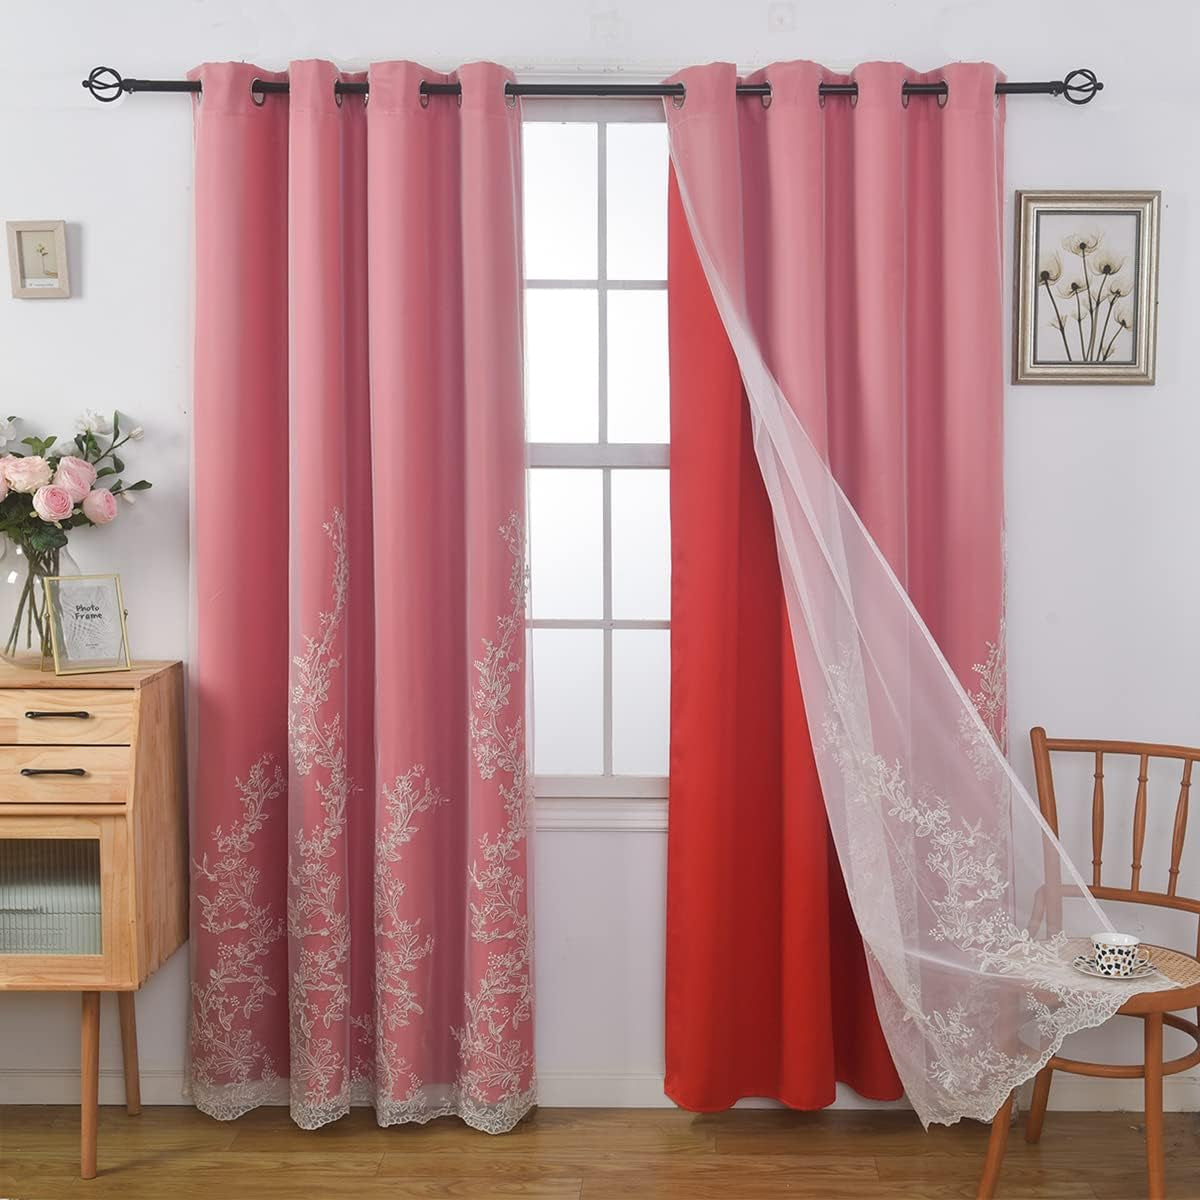 GYROHOME Double Layered Curtains with Embroidered White Sheer Tulle, Mix and Match Curtains Room Darkening Grommet Top Thermal Insulated Drapes,2Panels,52X84Inch,Beige  GYROHOME Red 52Wx63Lx2 